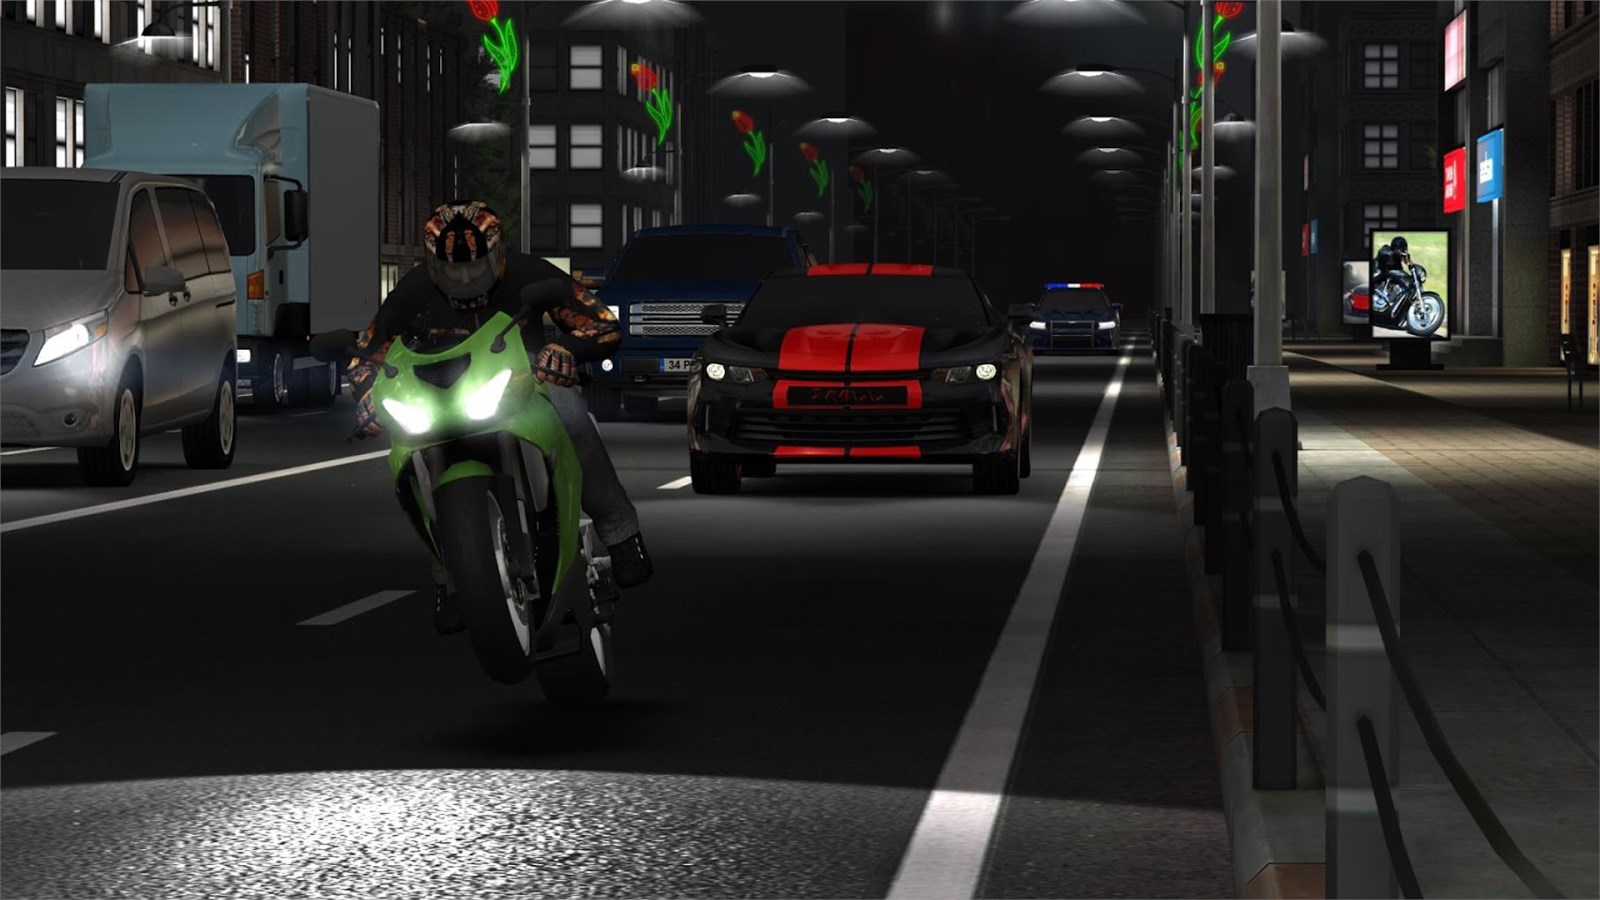 Racing Fever : Moto for iphone download